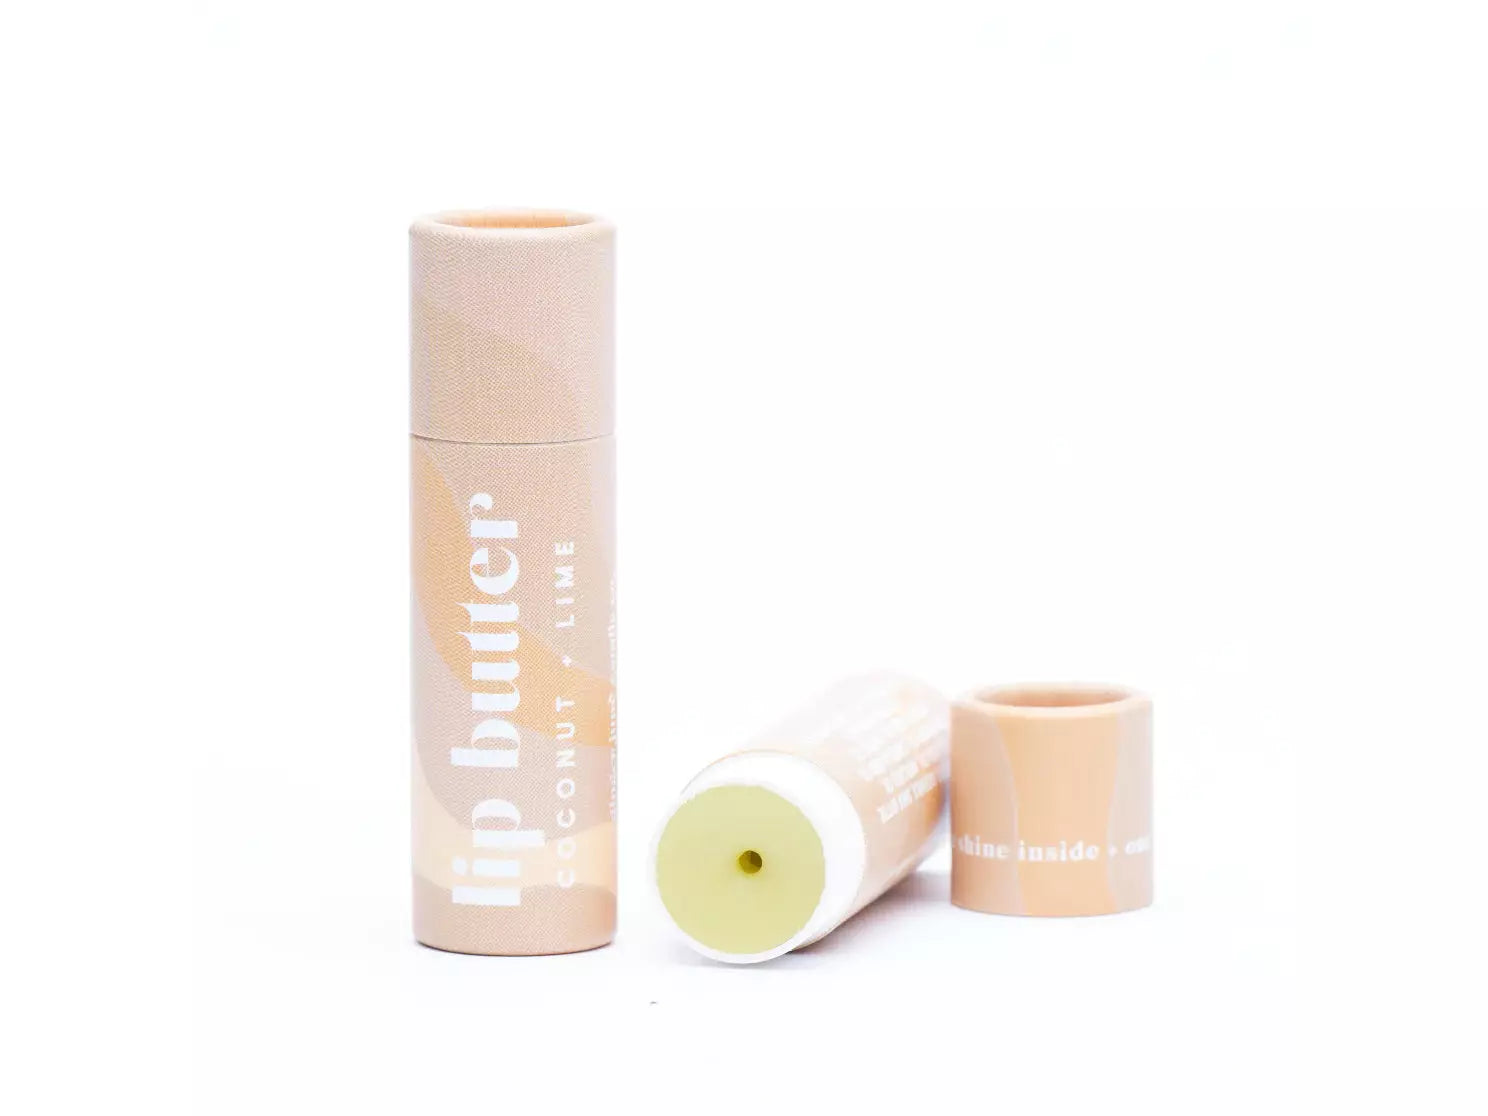 ginger june candle co coconut + lime botanically infused beeswax lip butter lip balm in cardboard tube